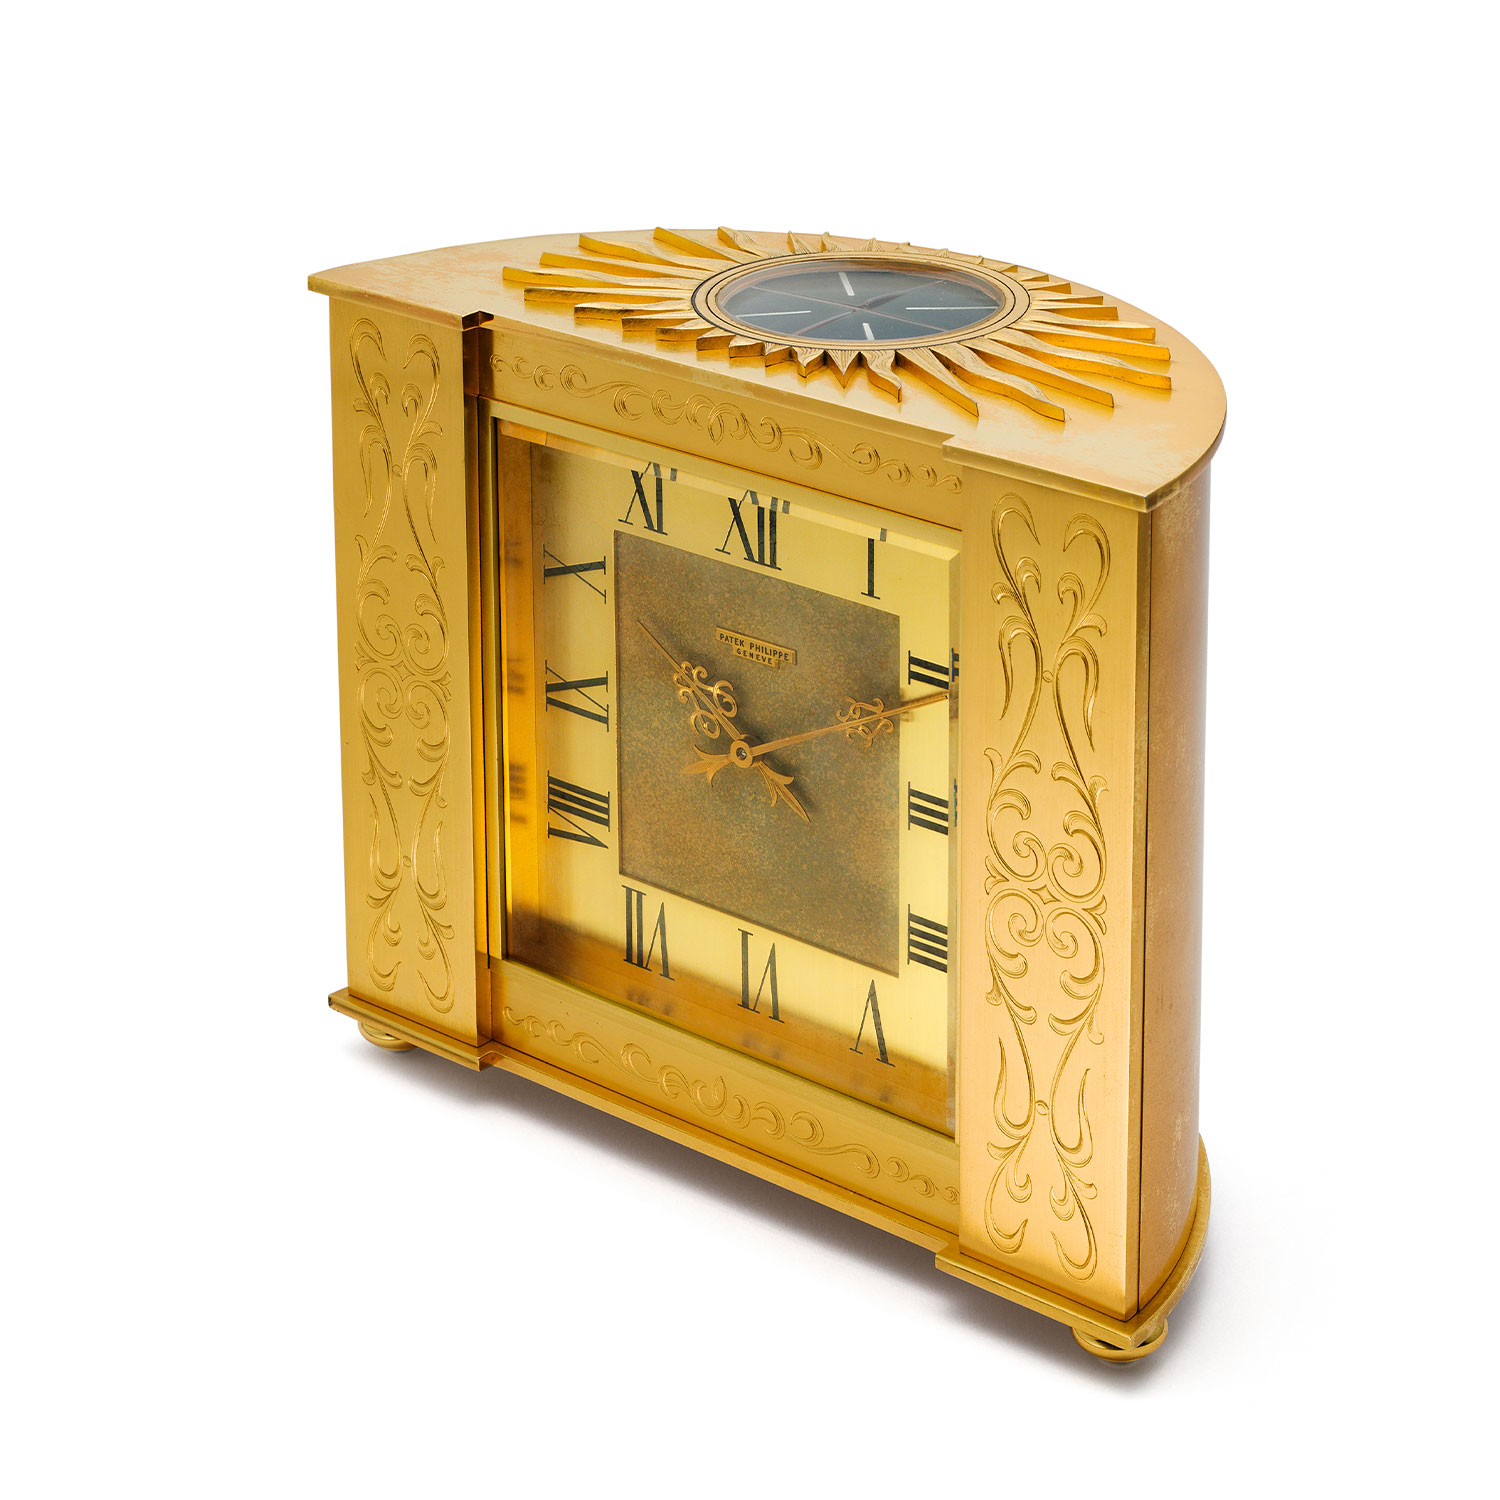 PATEK PHILIPPE GILDED BRASS AND LACQUER SOLAR DESK CLOCK 